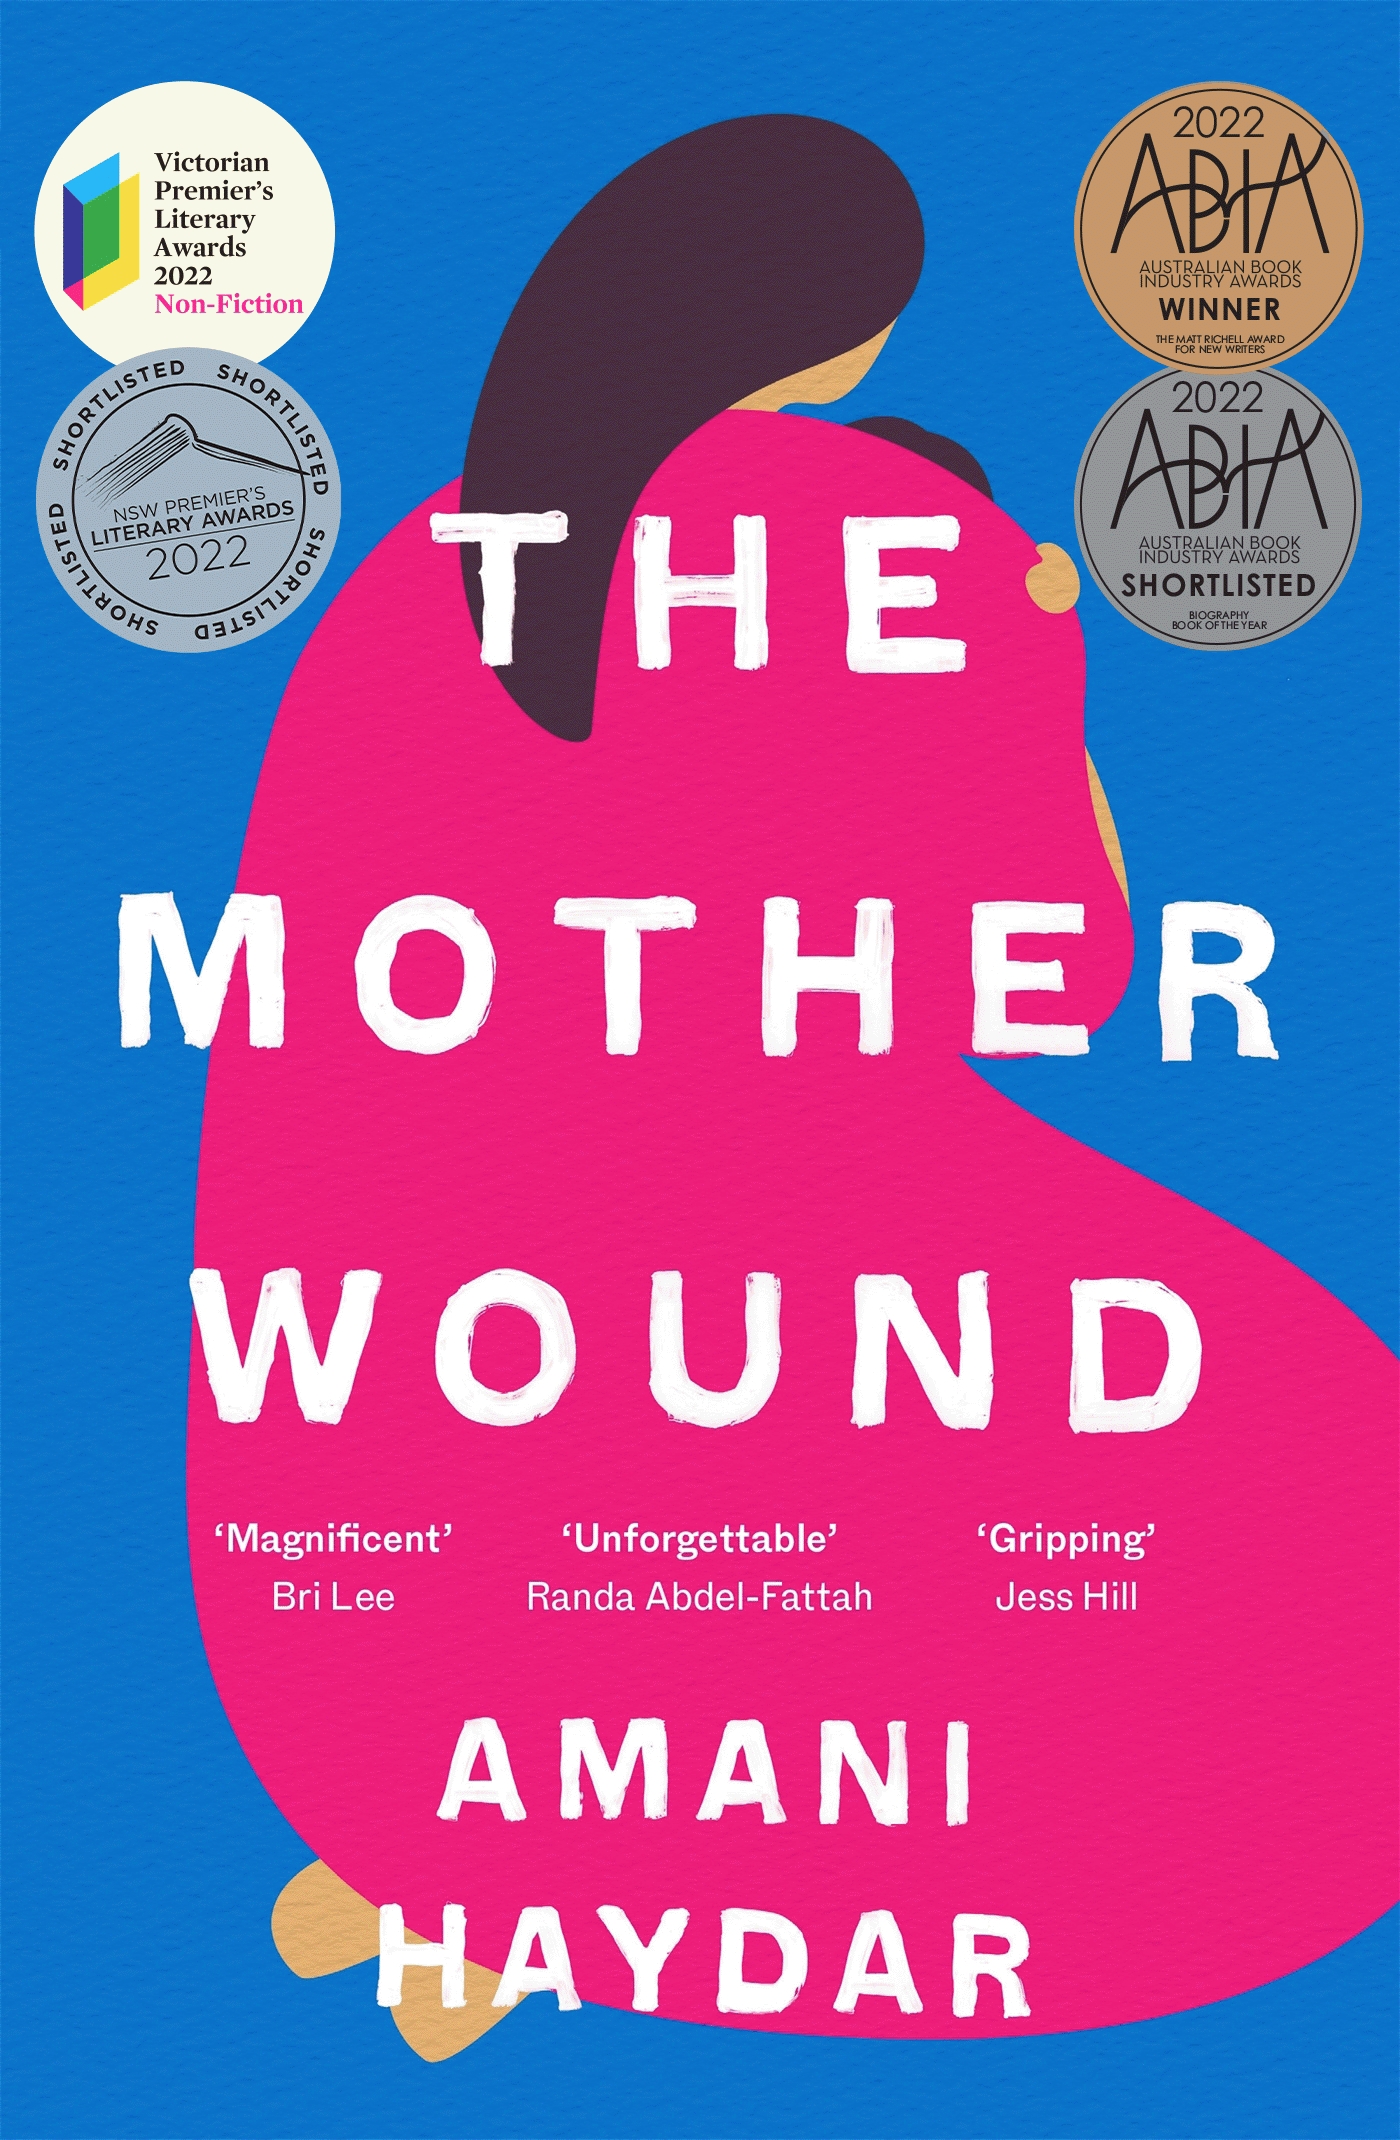 Cover of The Mother Wound by Amani Haydar. It is a blue book showing a dark haired stylised woman in a pink dress holding an infant